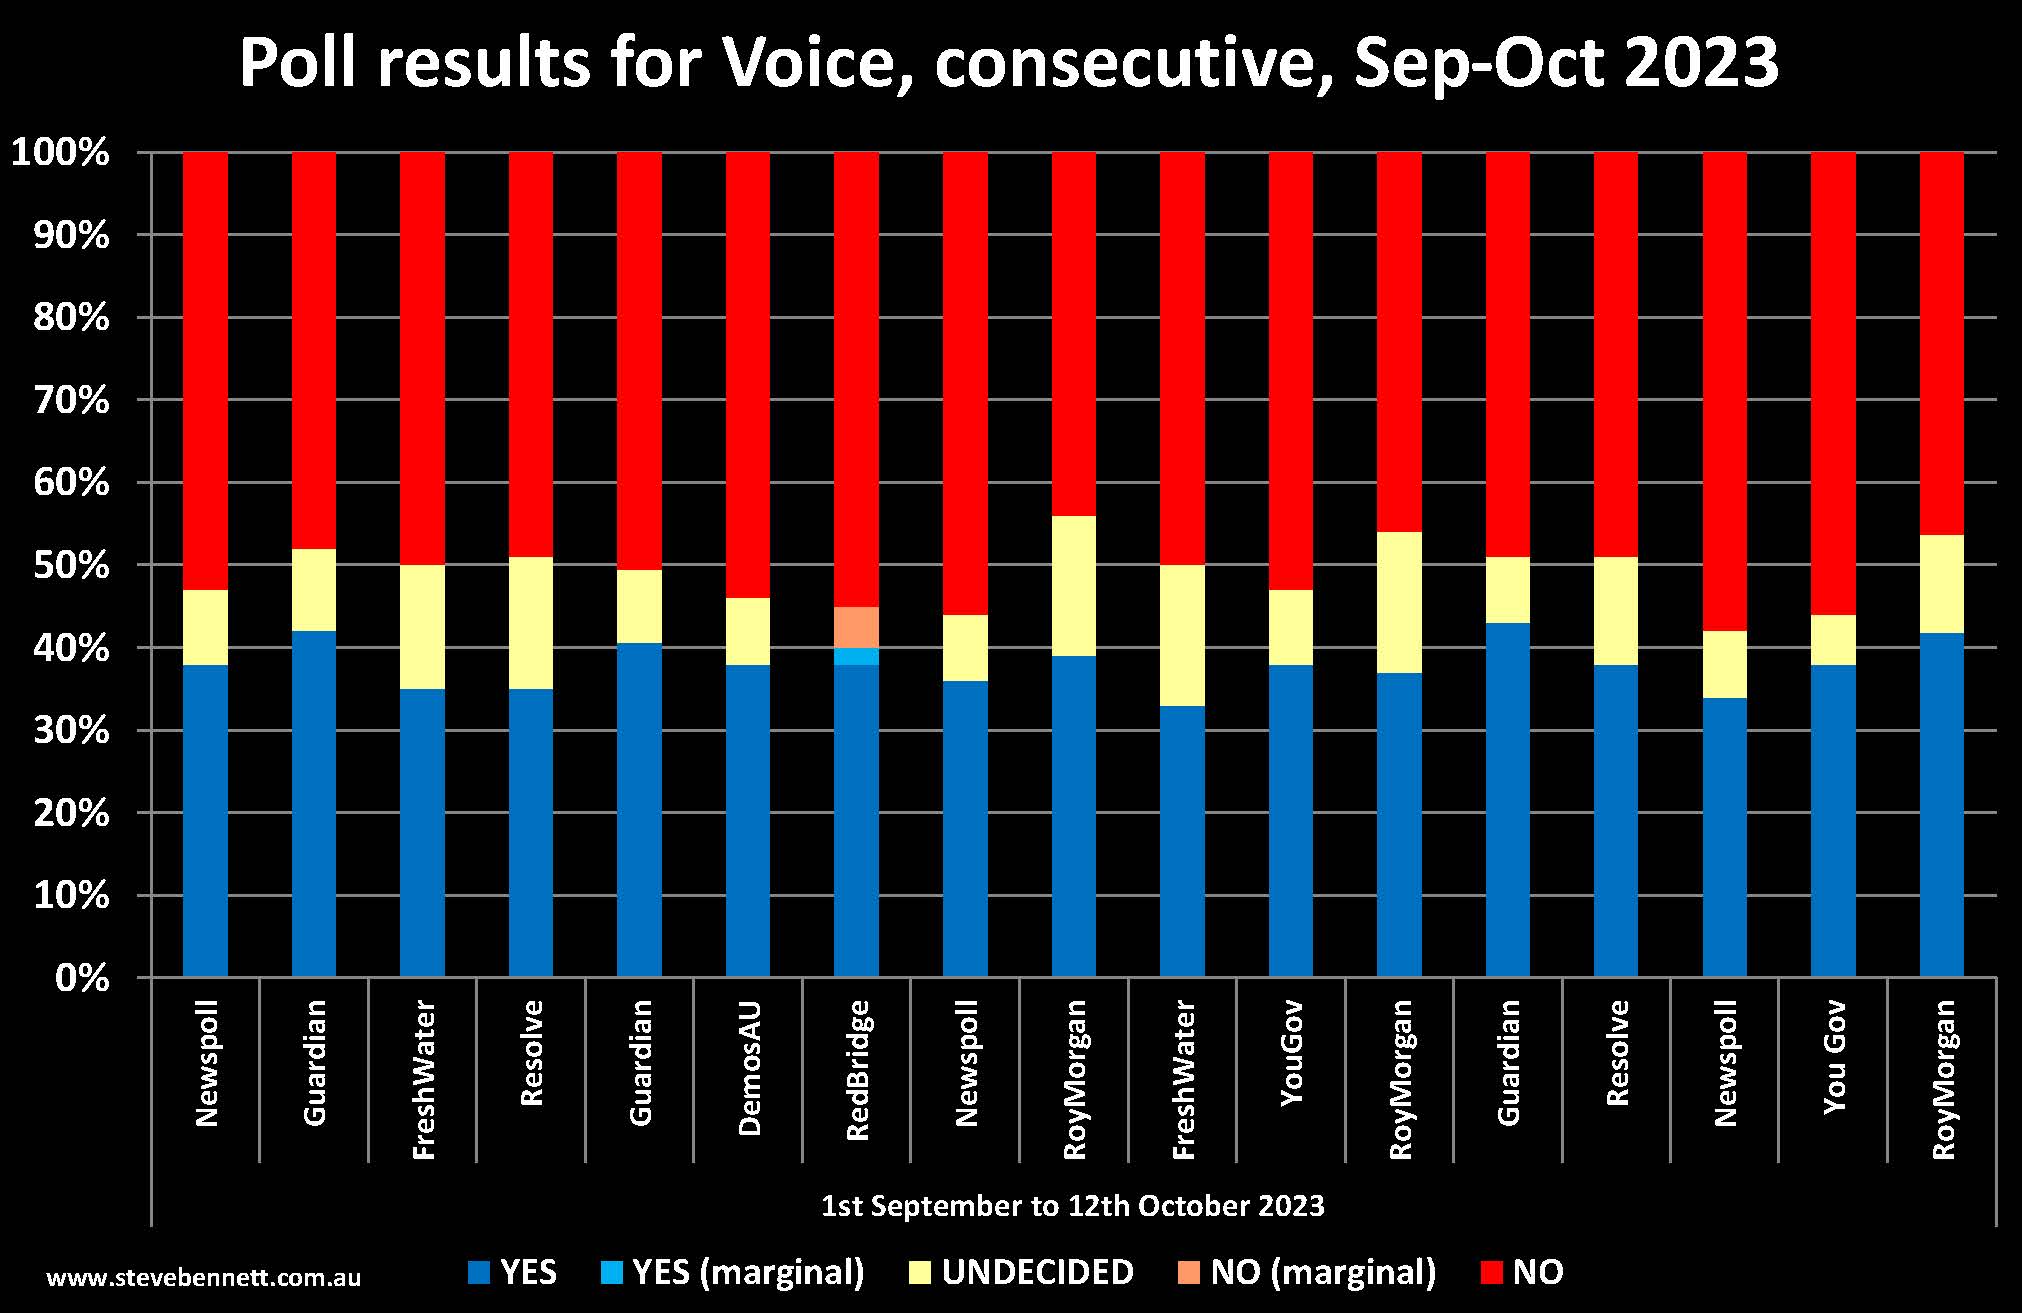 Consecutive poll results from 1st September to 12th October 2023 for 'Voice' referundum